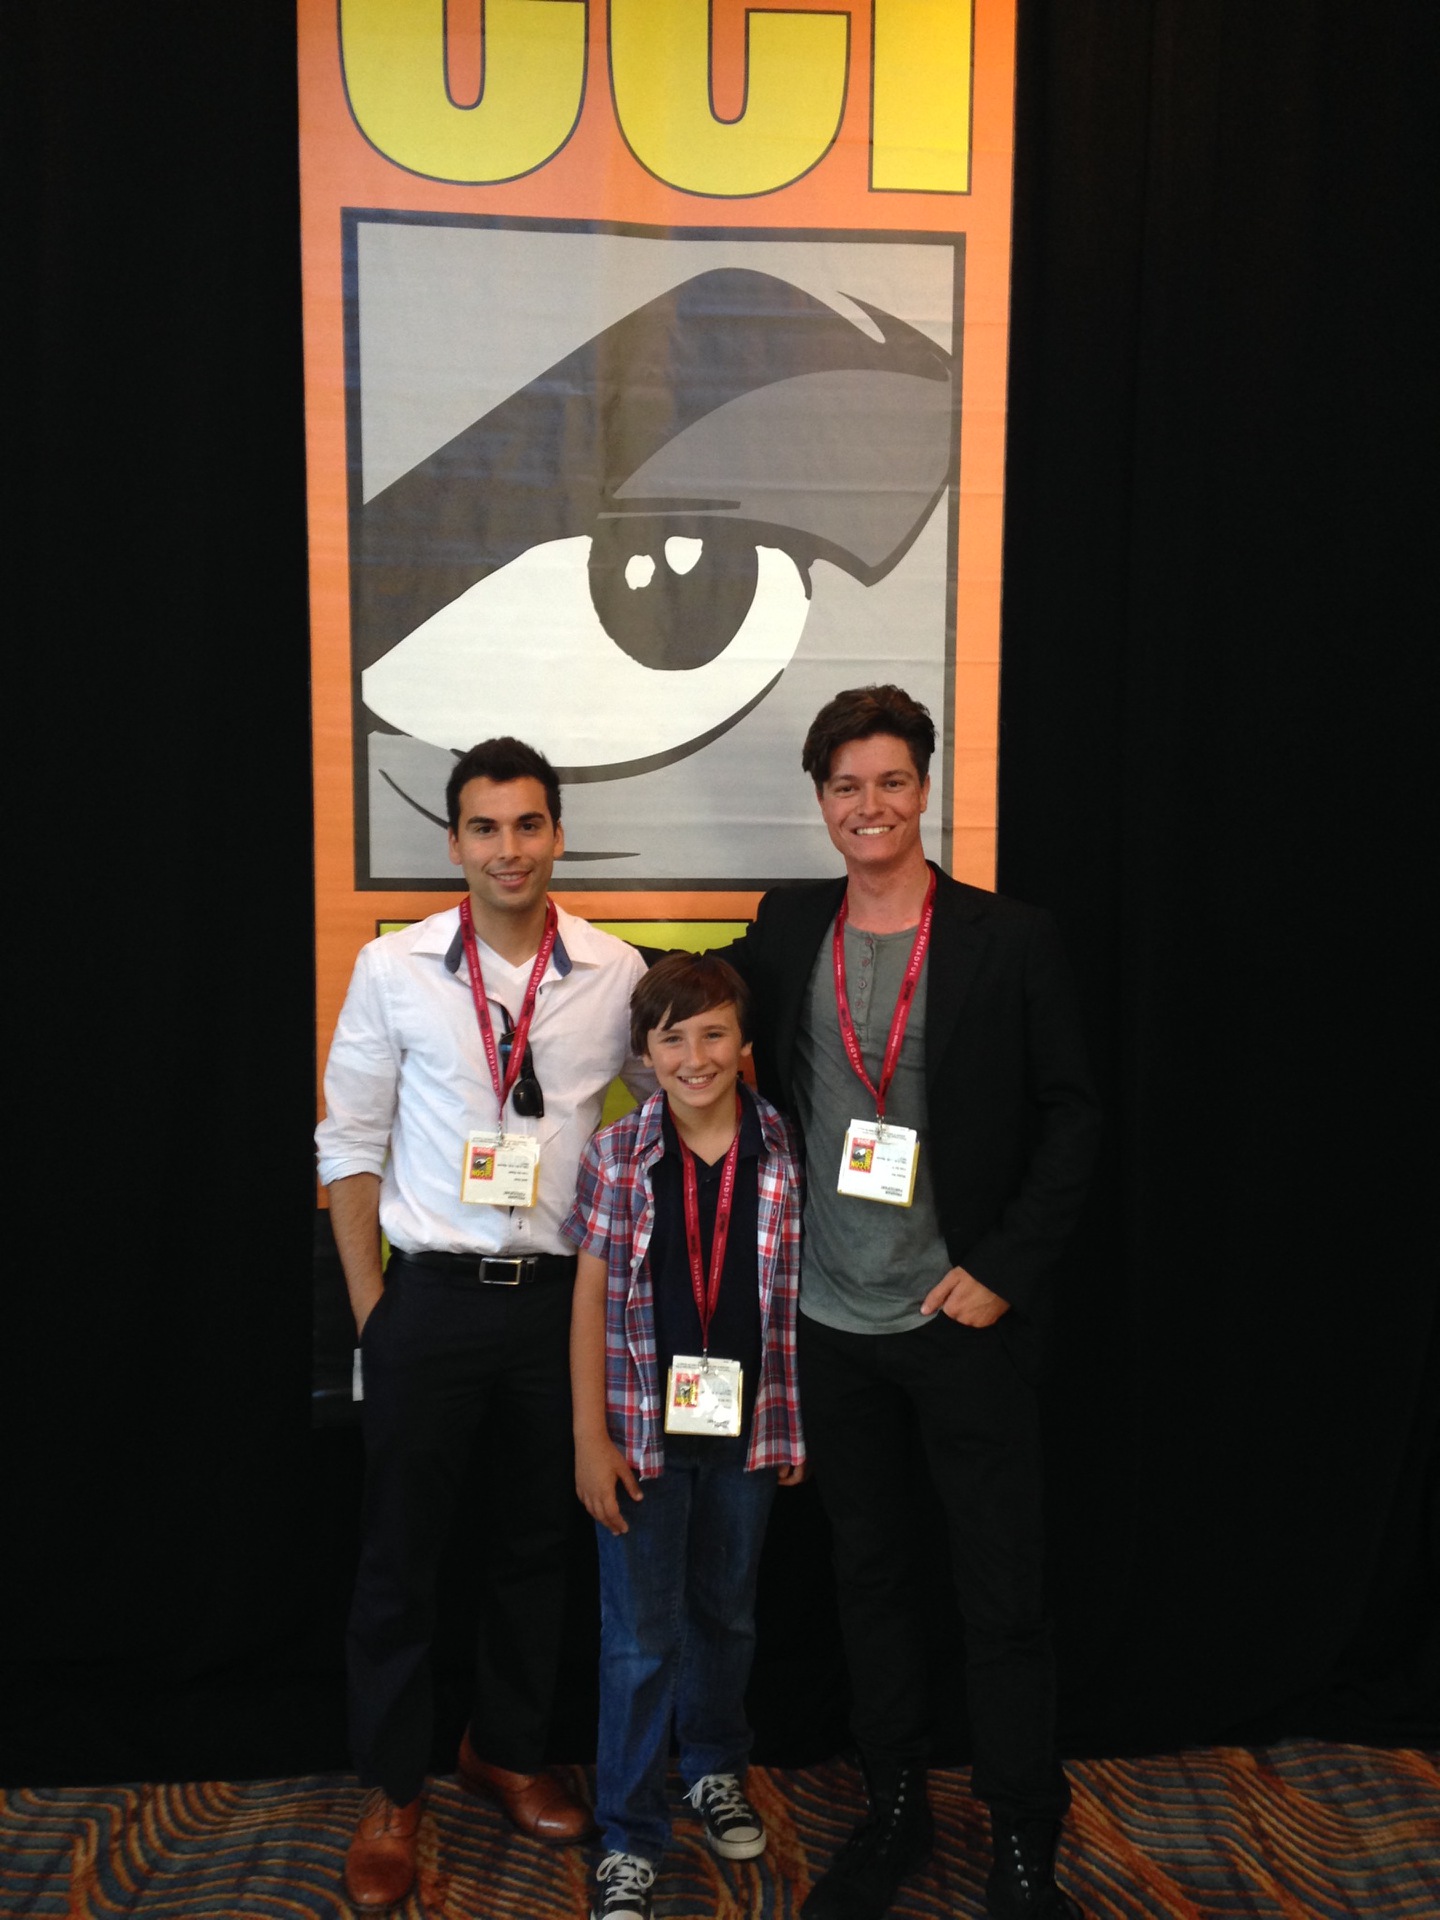 Cameron McIntyre with Jamil Jason Afzali, Producer of From The Woods and Nicolas Wendl, Director of From The Woods at Comic-Con International Film Festival 2104